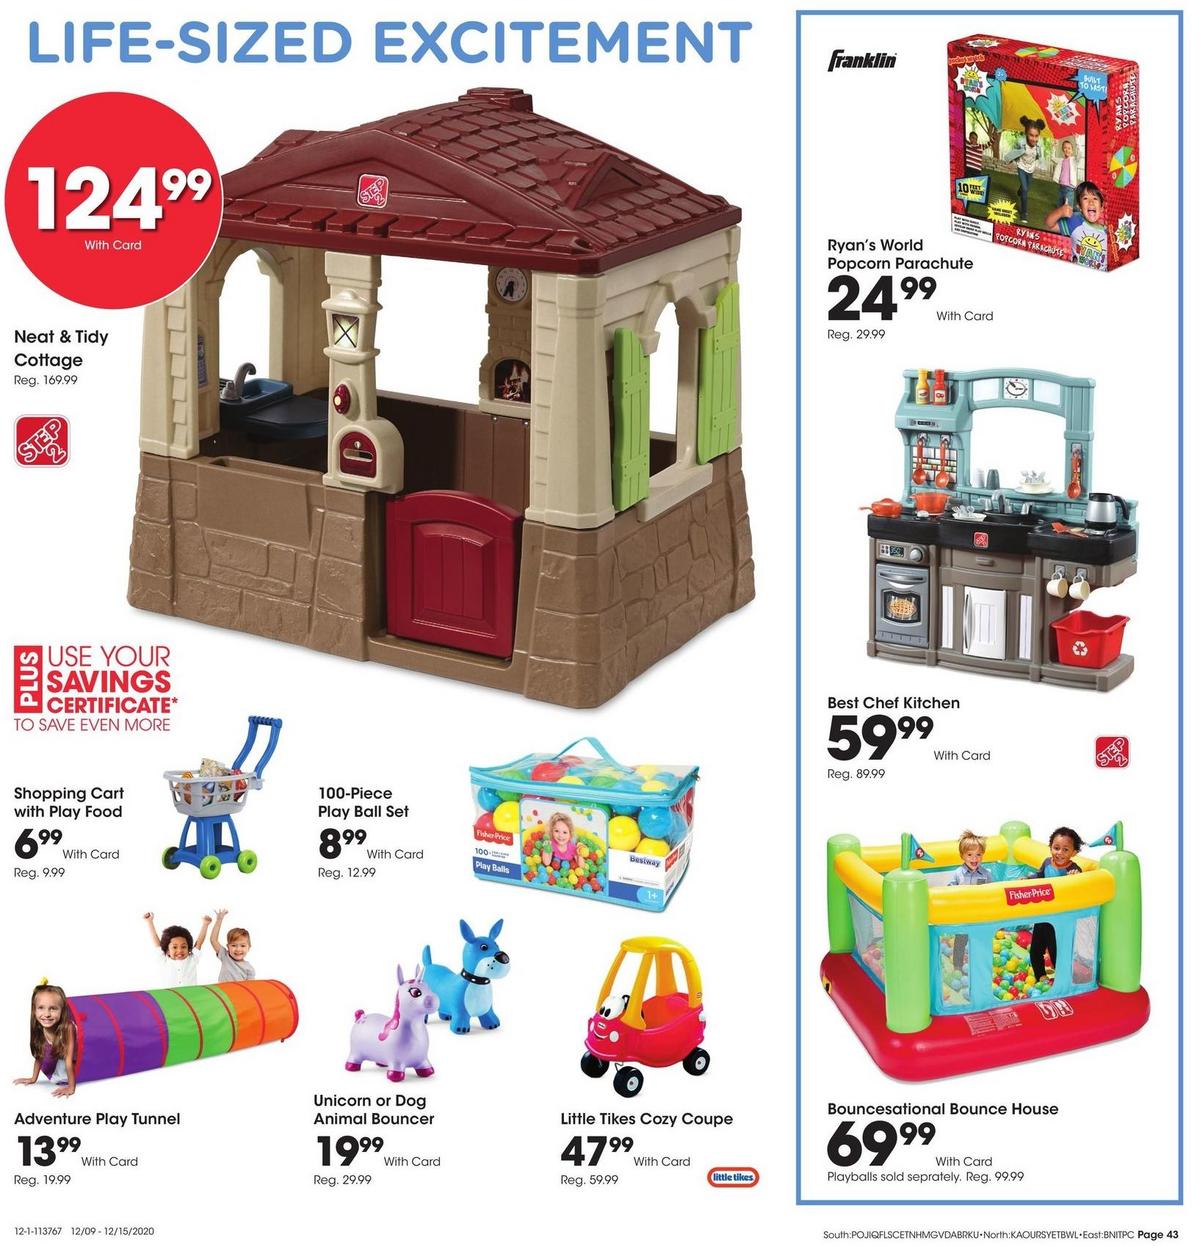 Fred Meyer General Merchandise Weekly Ad from December 9